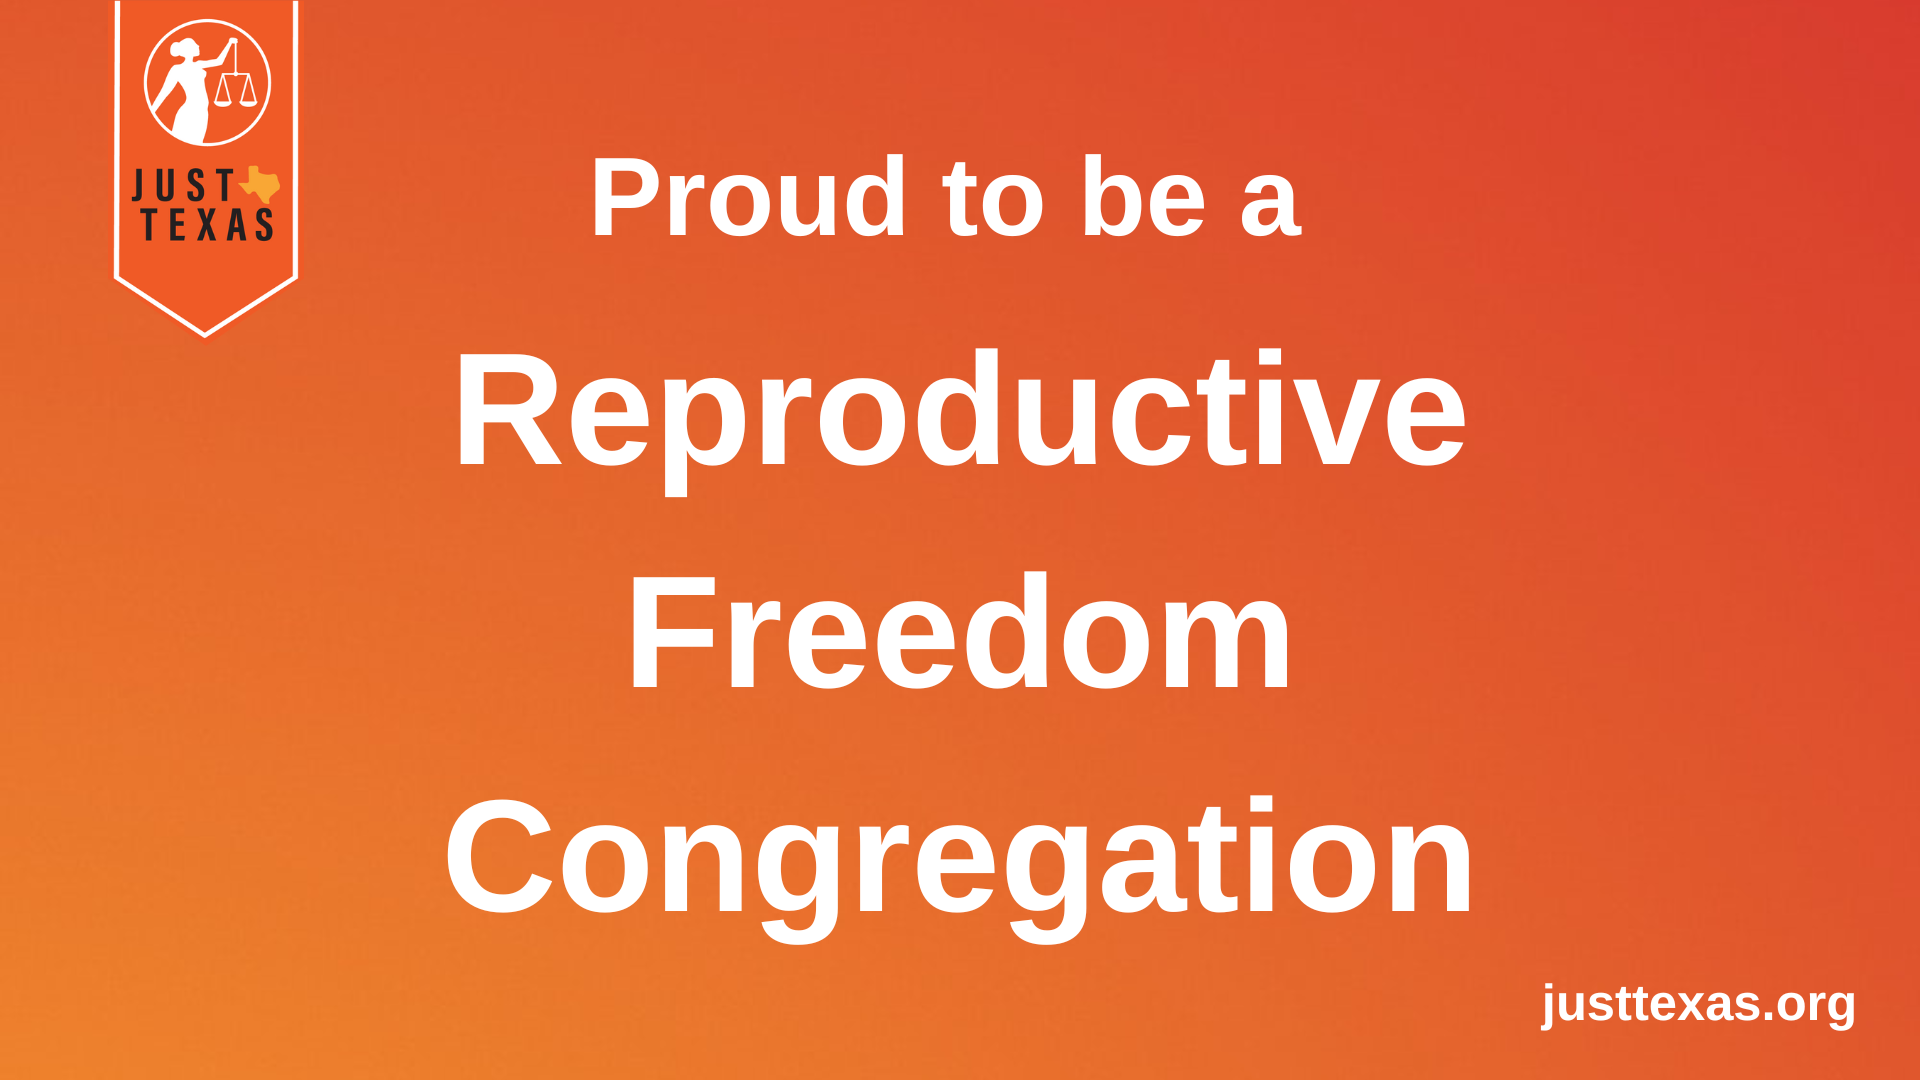 Dark and light orange image that reads "Proud to be a Reproductive Freedom Congregation" and links to Our Congregational commitments. The Just Texas website and logo are in the bottom corners.